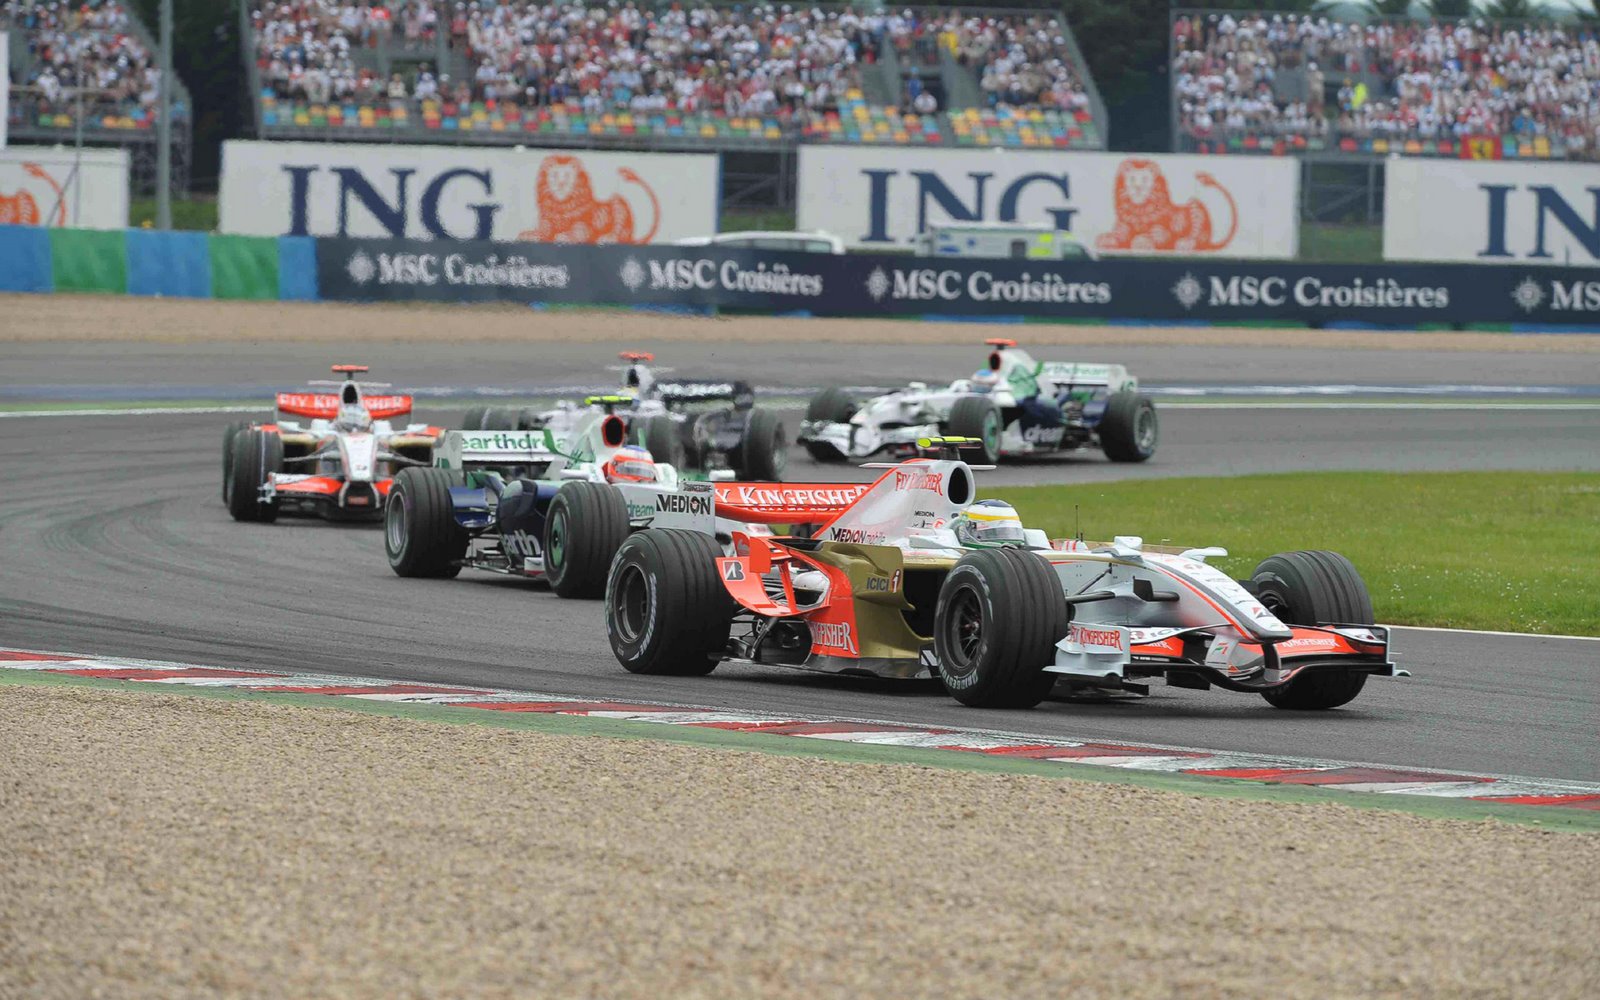 [Sunday+Race+in+France+Magny+Cours,+F1+2008+99.jpg]